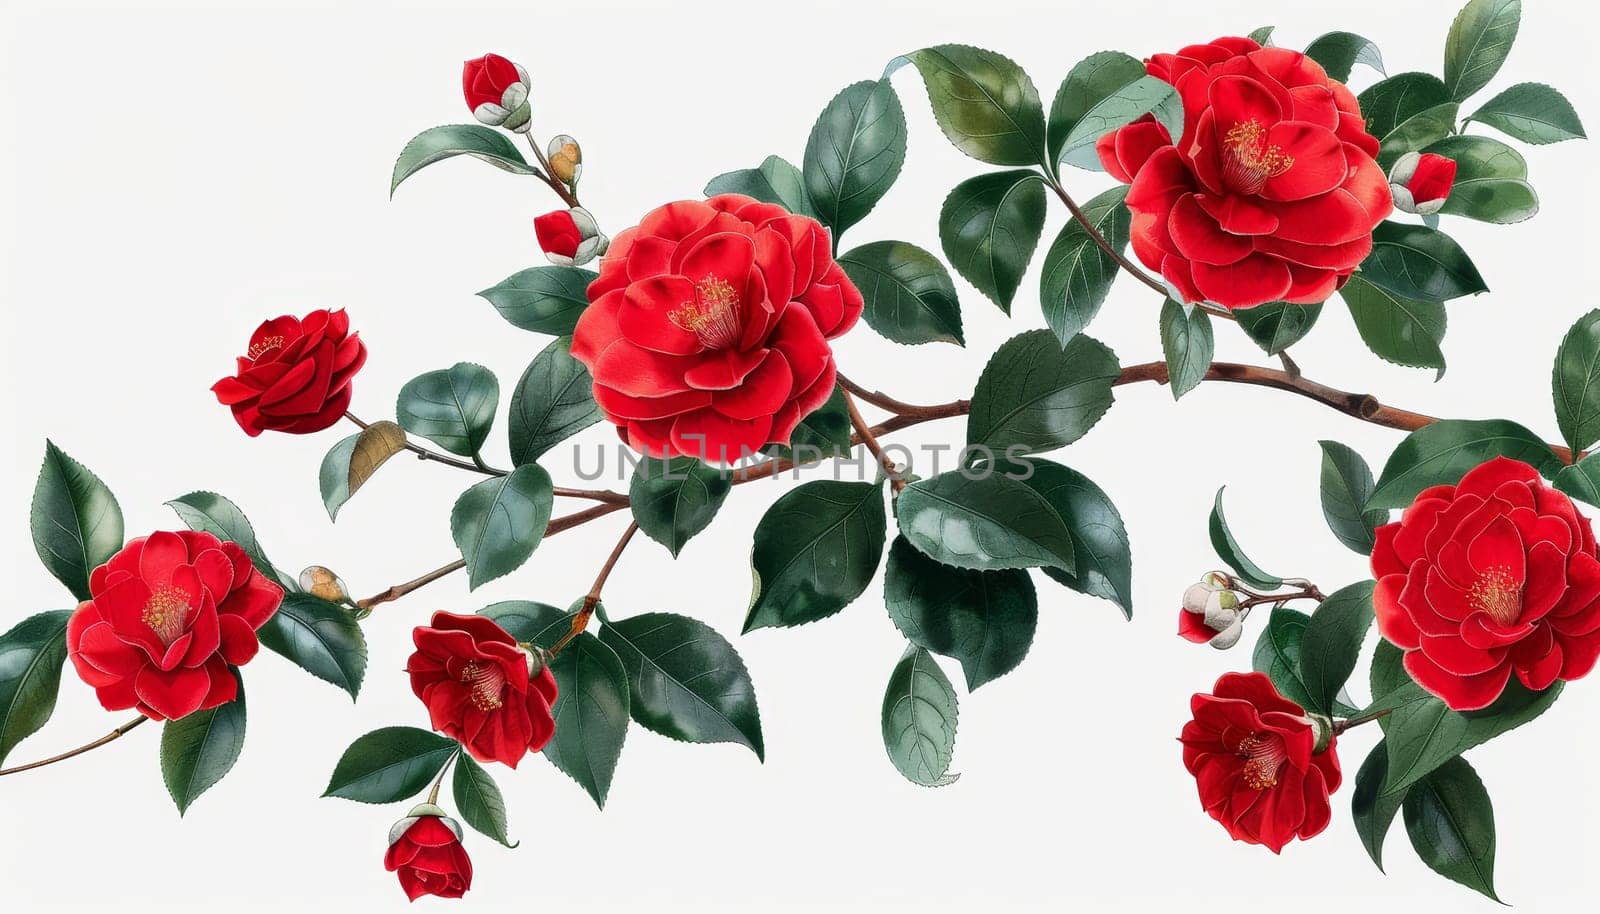 A red flower with green leaves is on a branch. The flower is surrounded by other red flowers